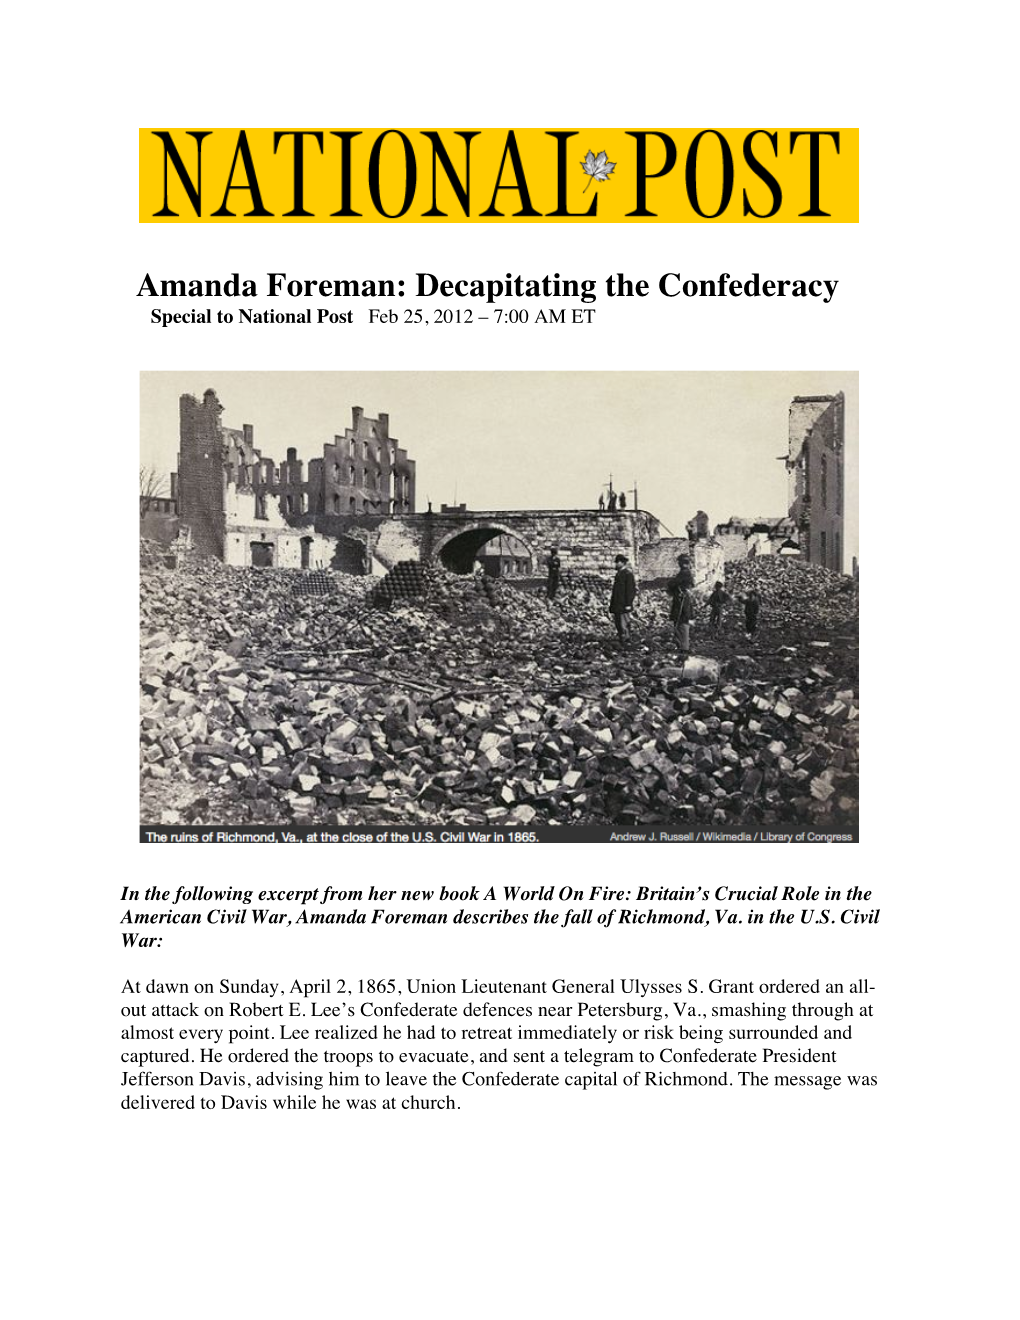 Decapitating the Confederacy Special to National Post Feb 25, 2012 – 7:00 AM ET